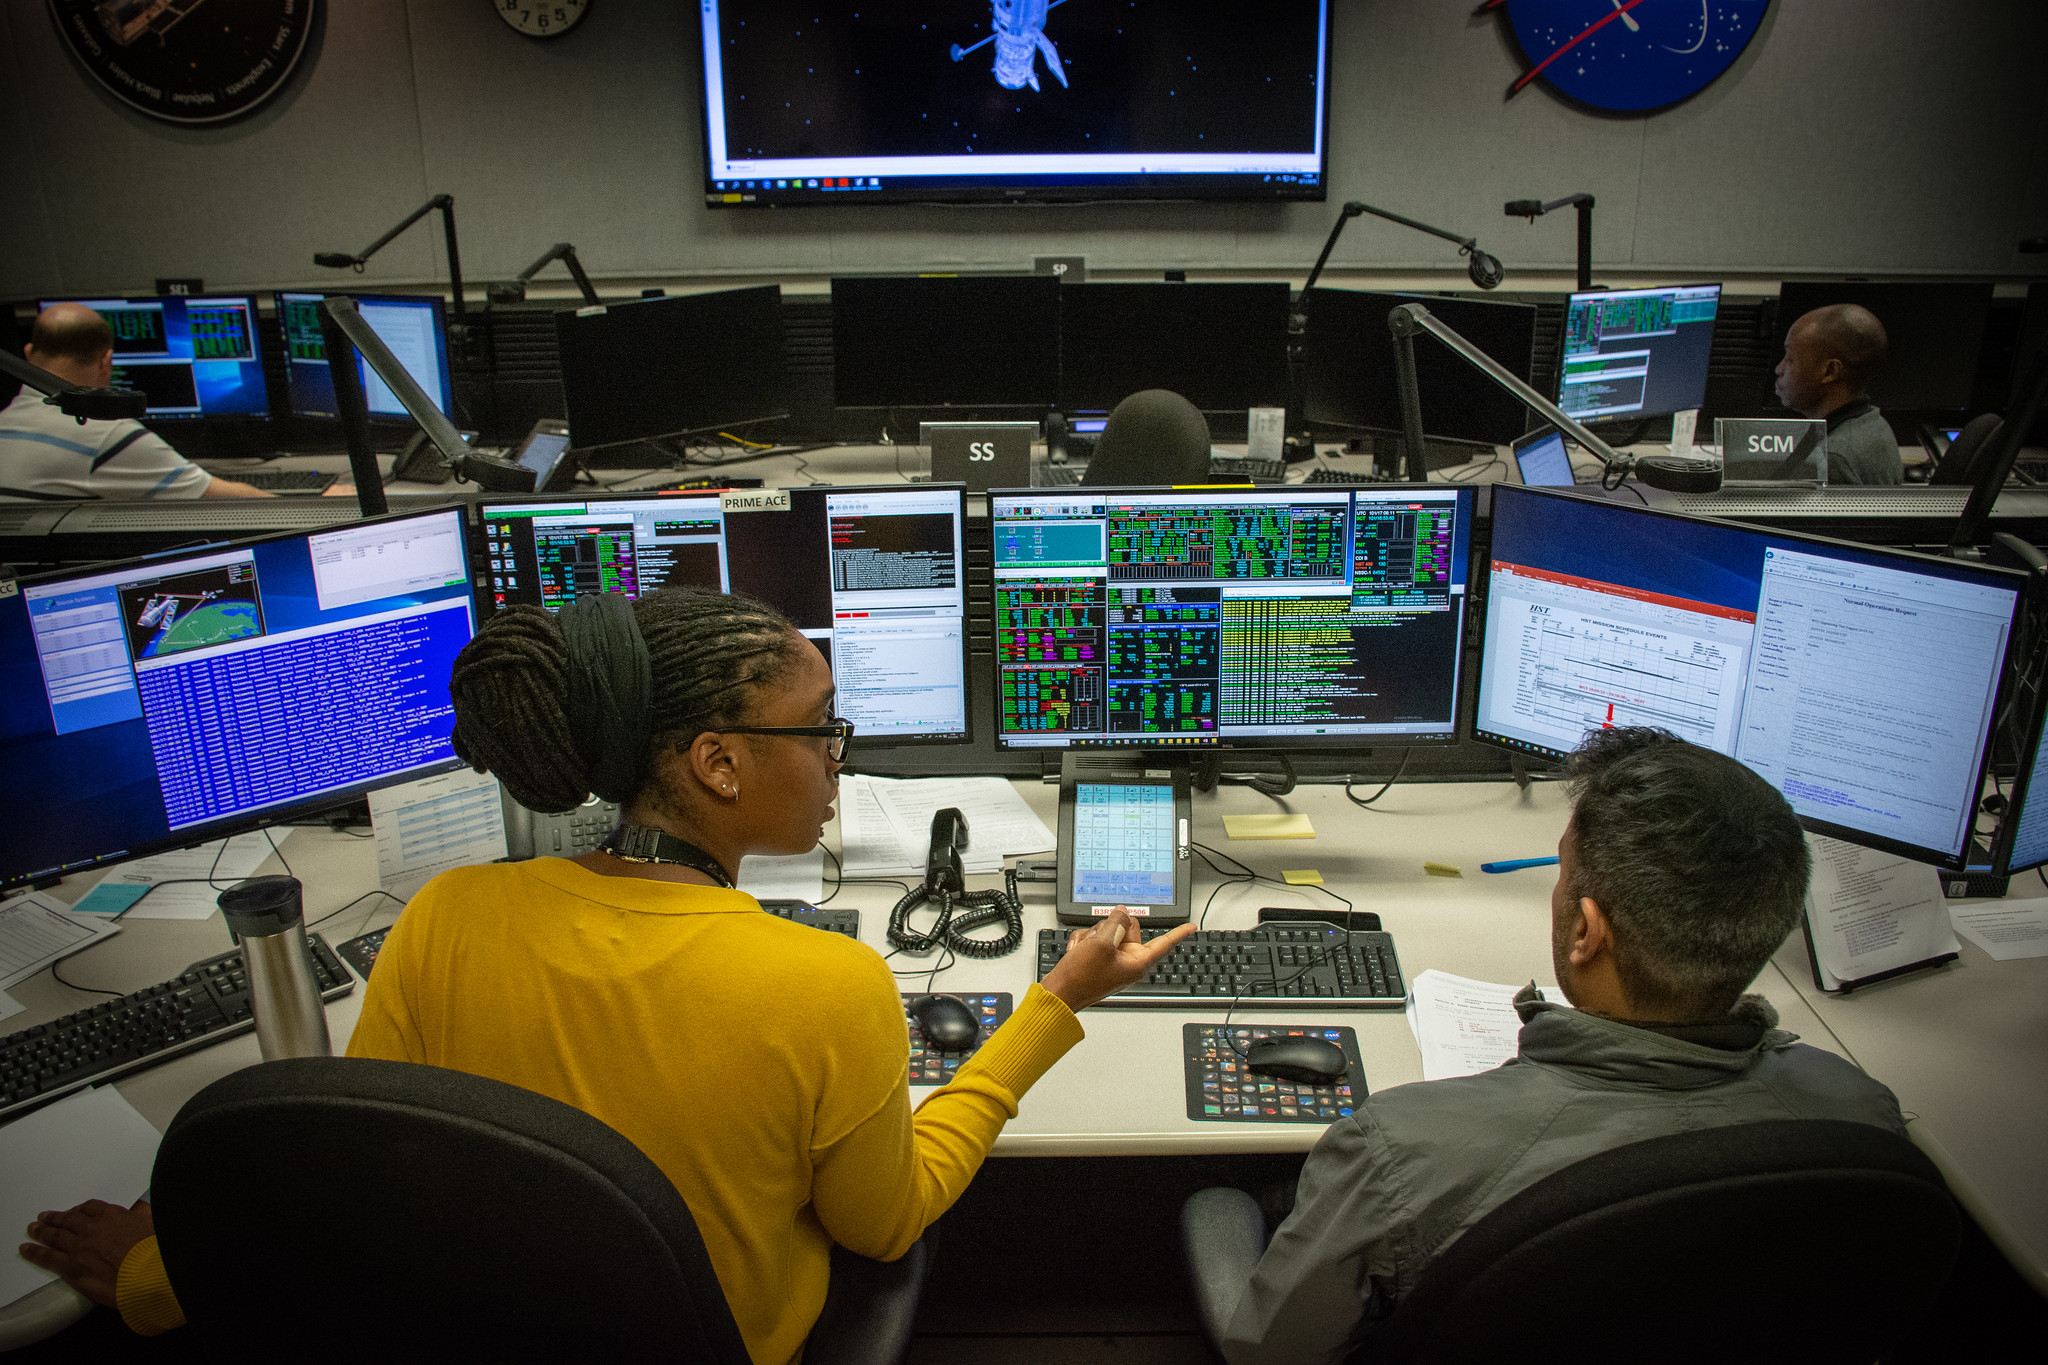 Two employees sit in front of a bank of computer screens in the Mission Operations Room for the Hubble Space Telescope at NASA's Goddard Space Flight Center in Maryland.